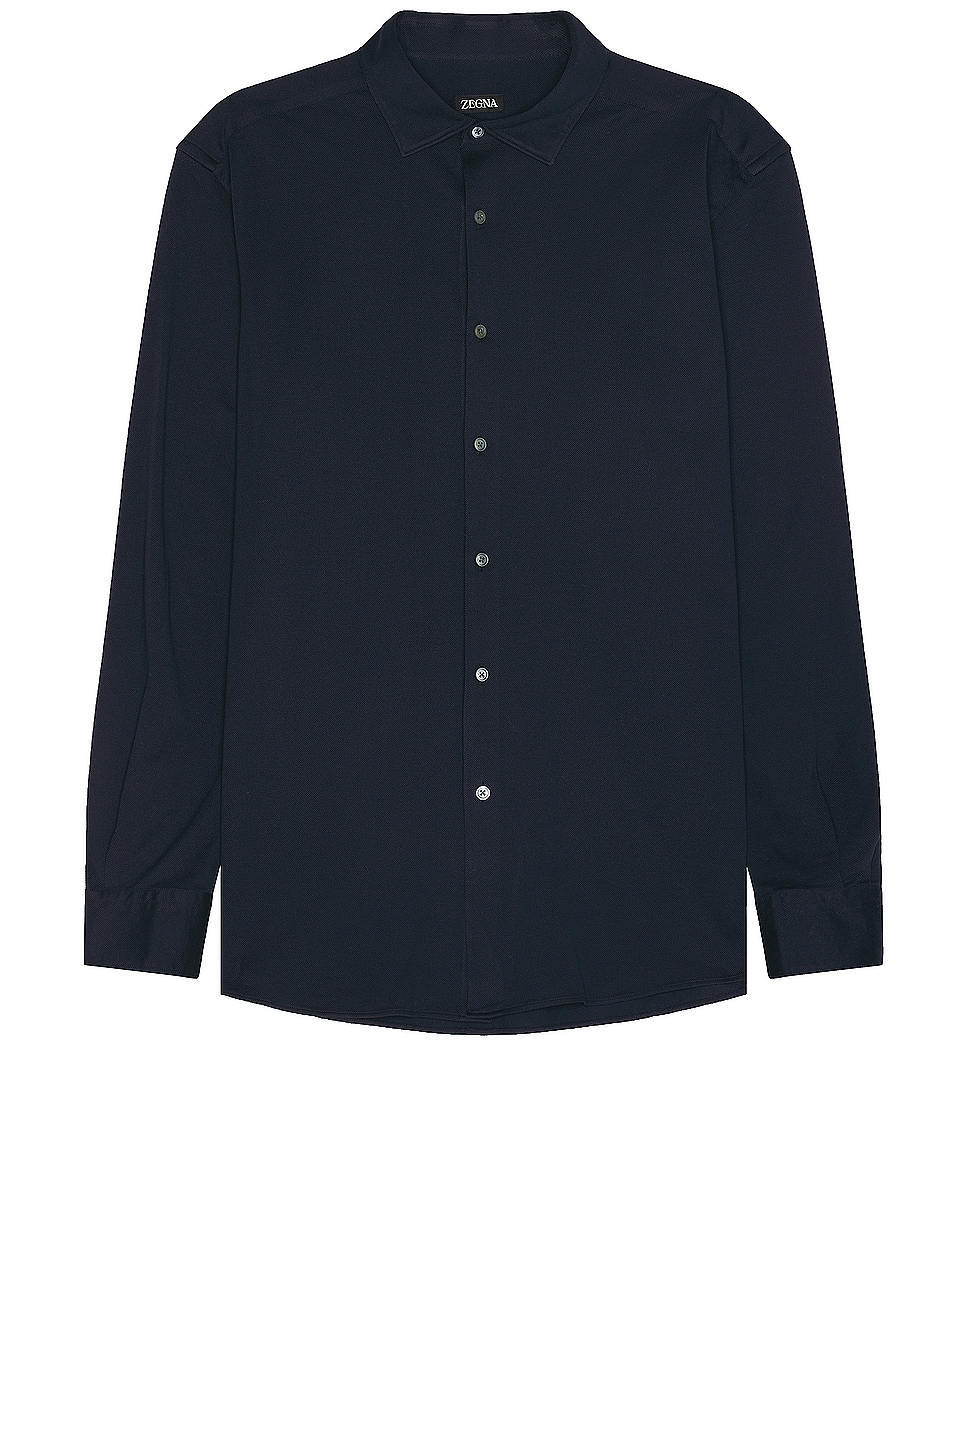 Image 1 of Zegna Pure Cotton Jersey Long Sleeve Shirt in Navy